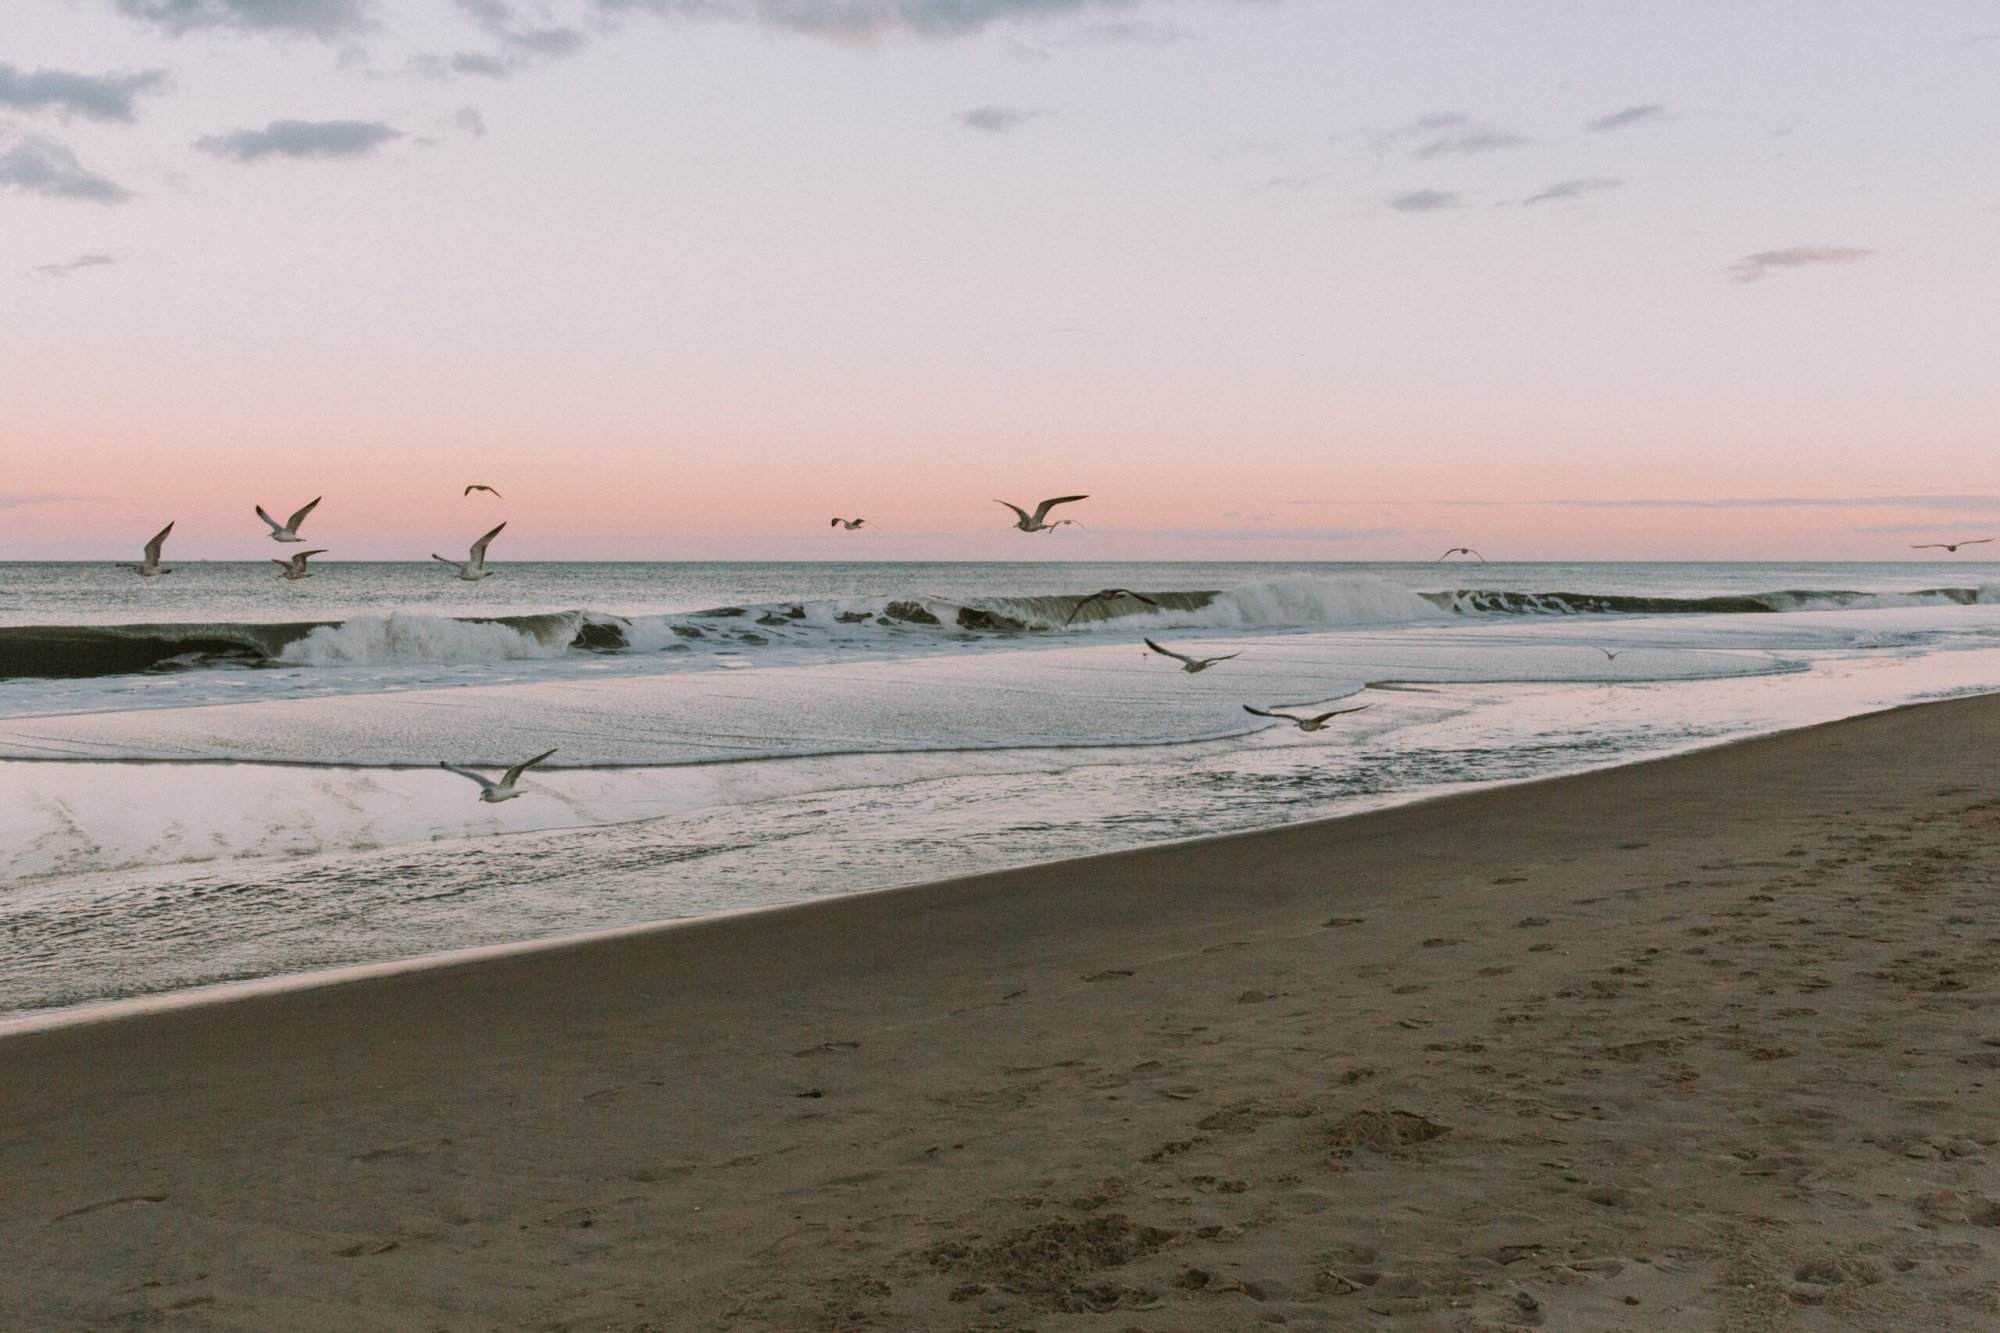 Seagulls flying over the atlantic ocean at sunset